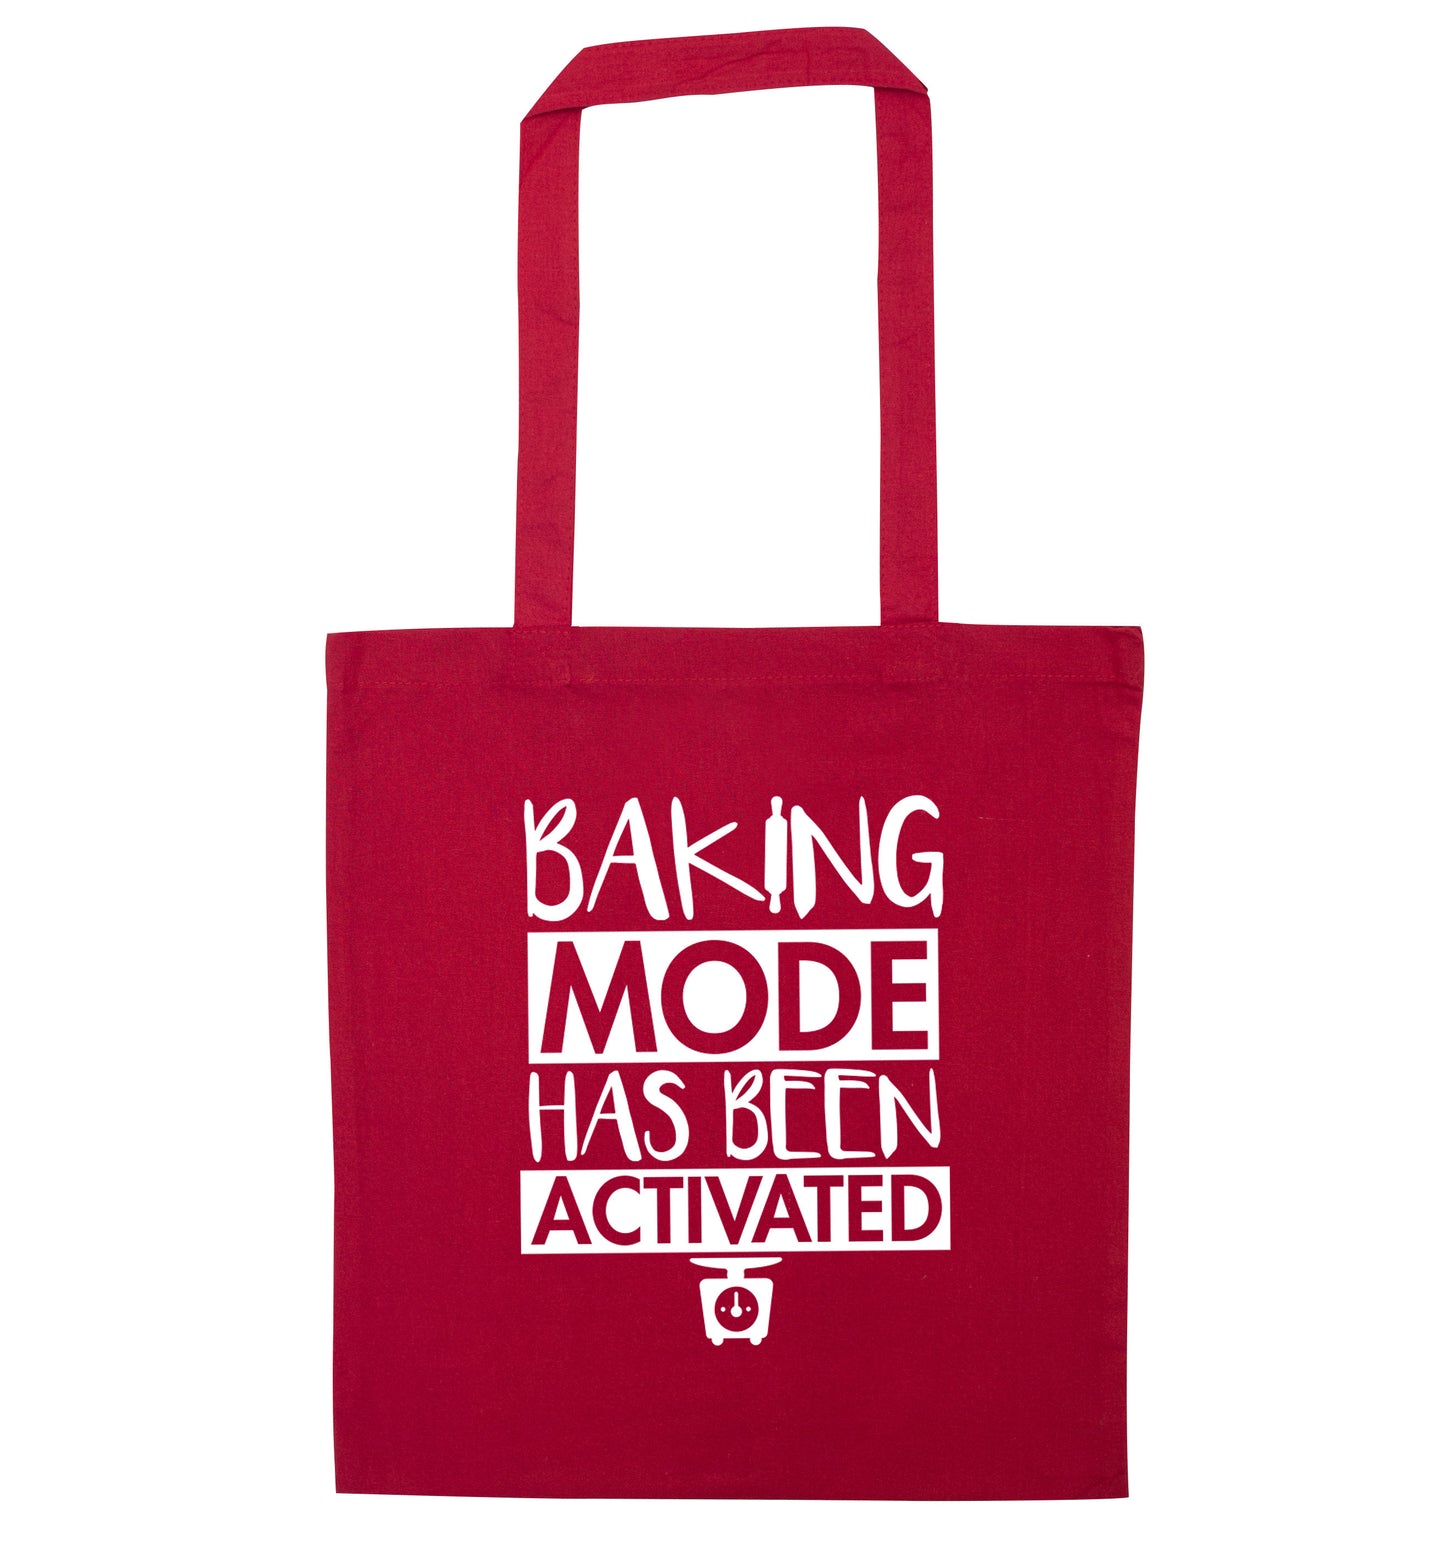 Baking mode has been activated red tote bag